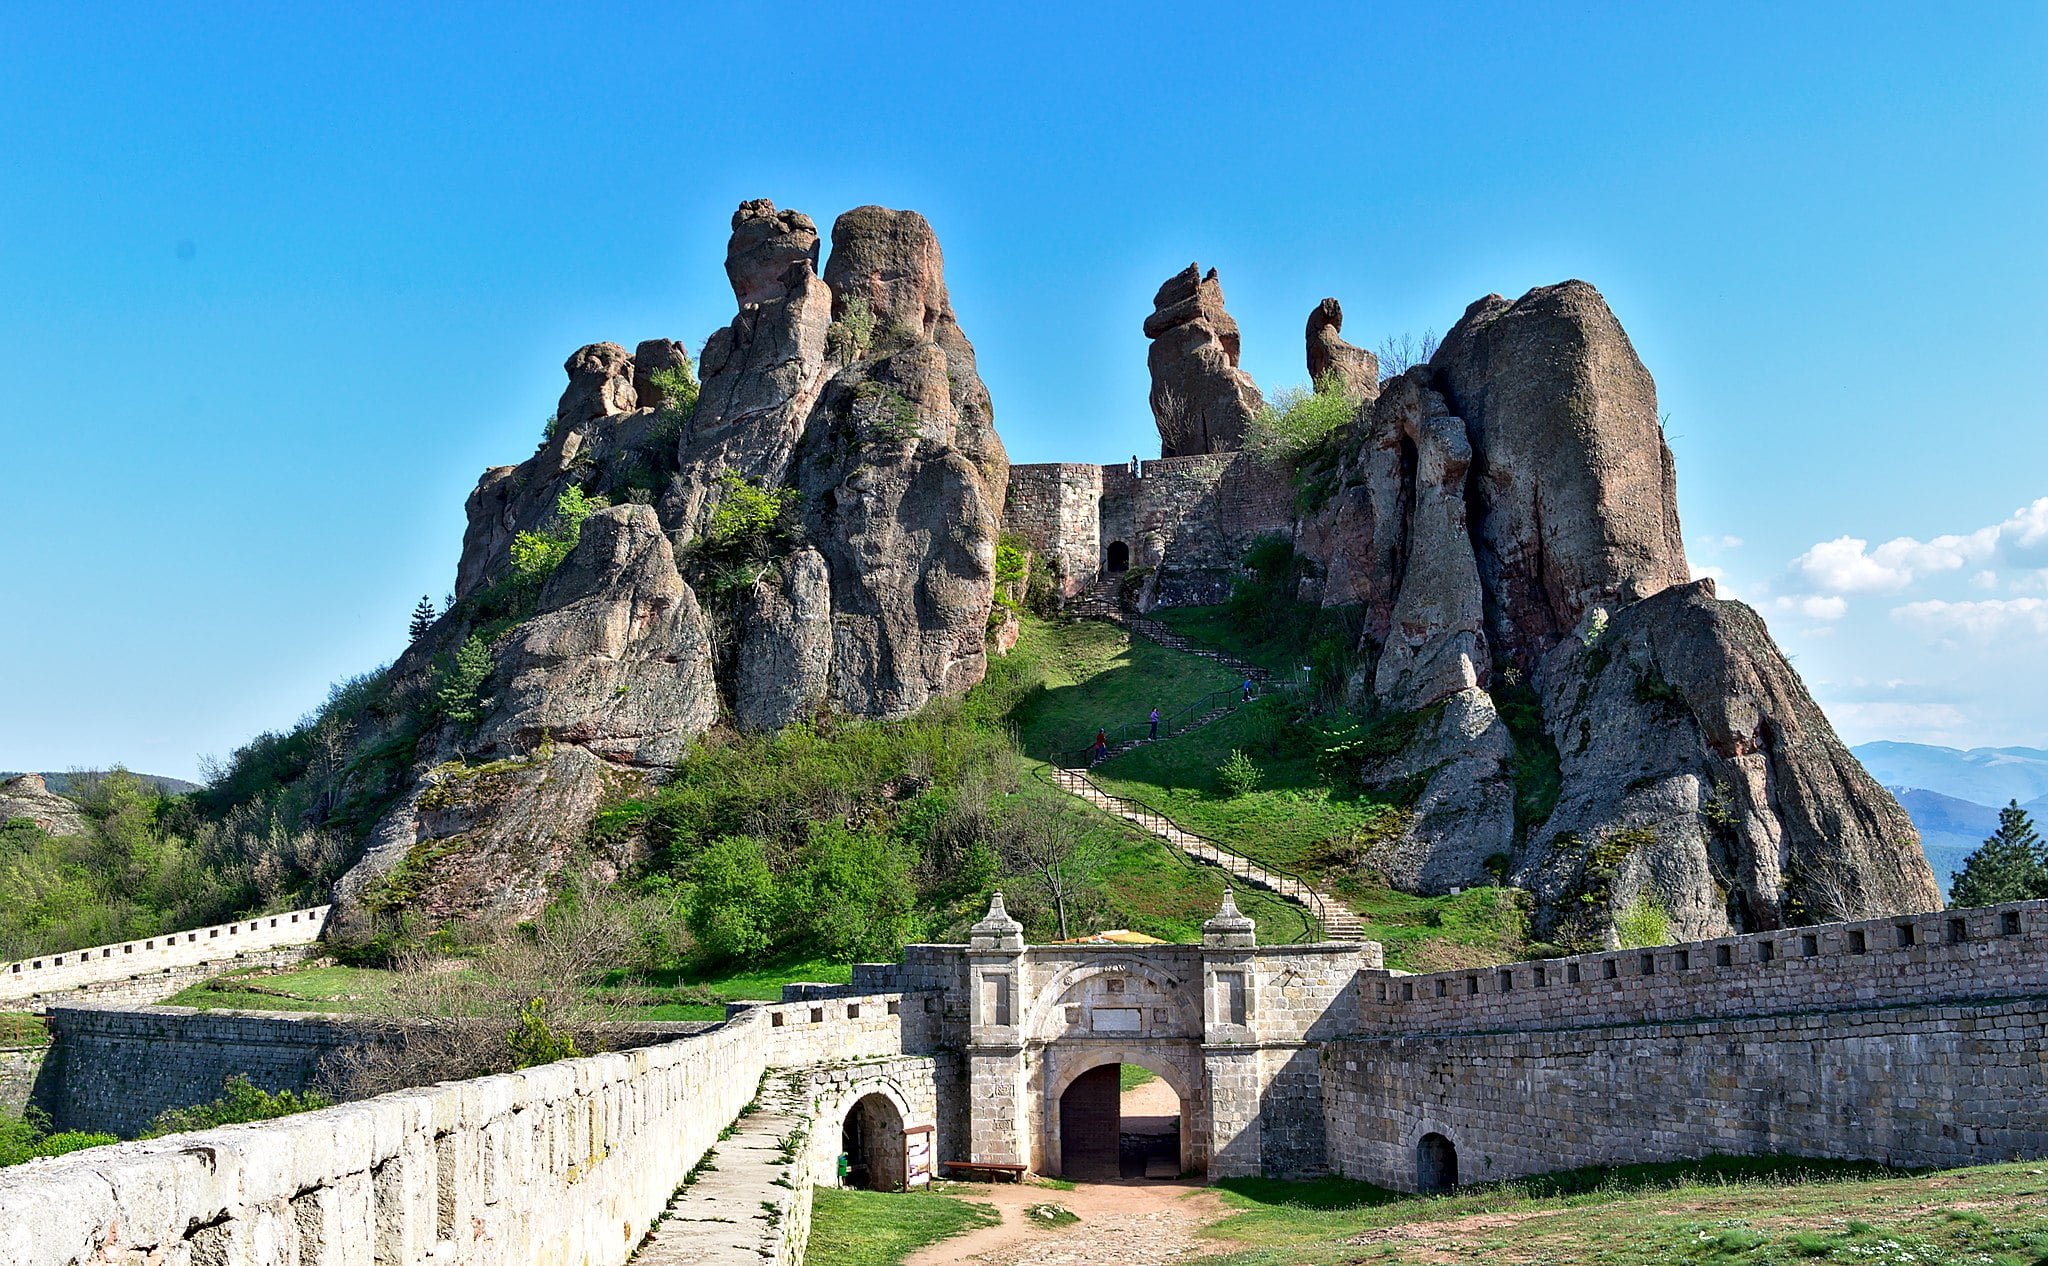 Belogradchik Castle and natural rock formations in Bulgaria.